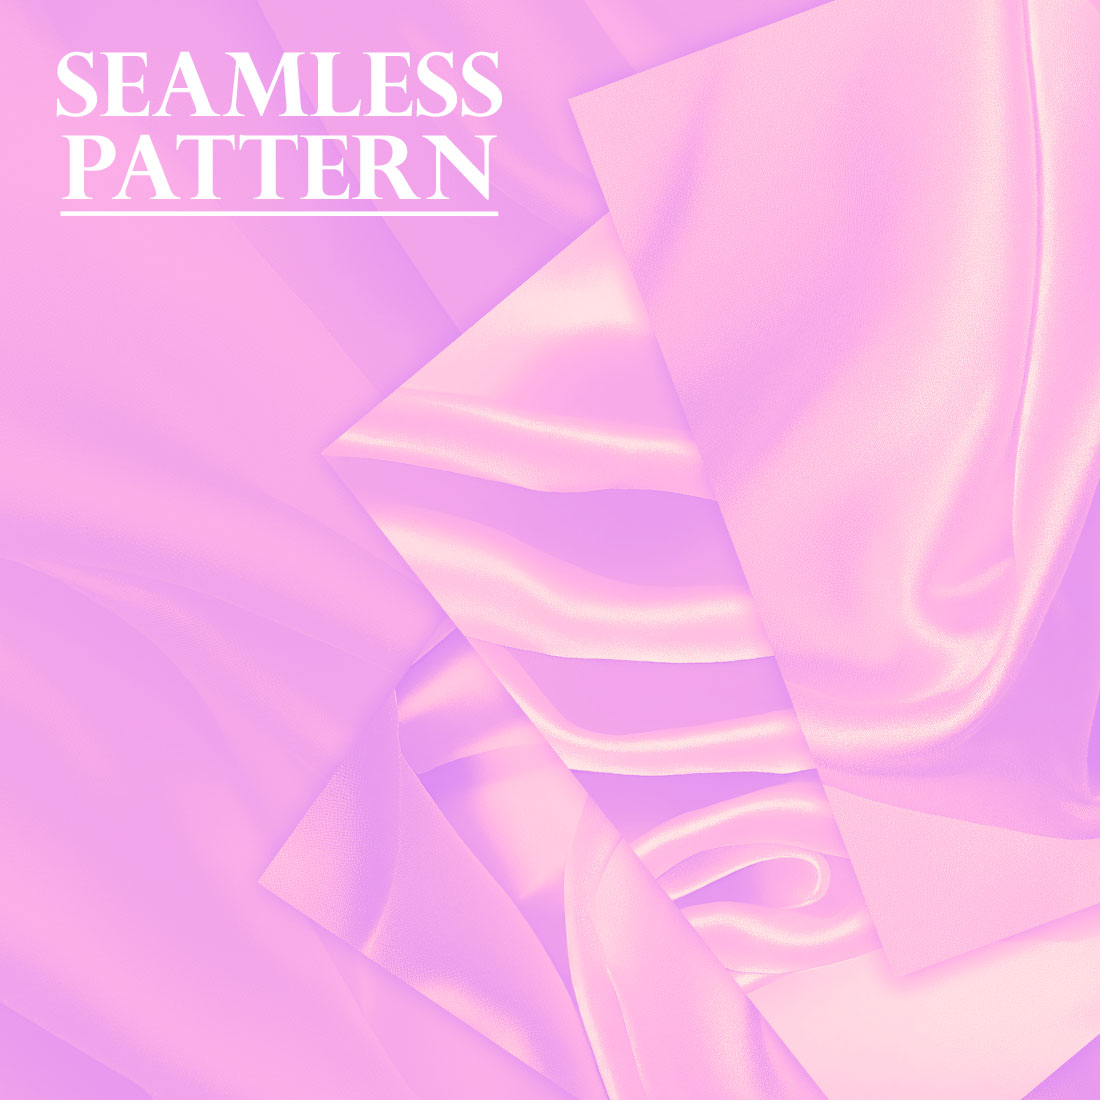 Collection of images with gorgeous candy pink silk patterns.